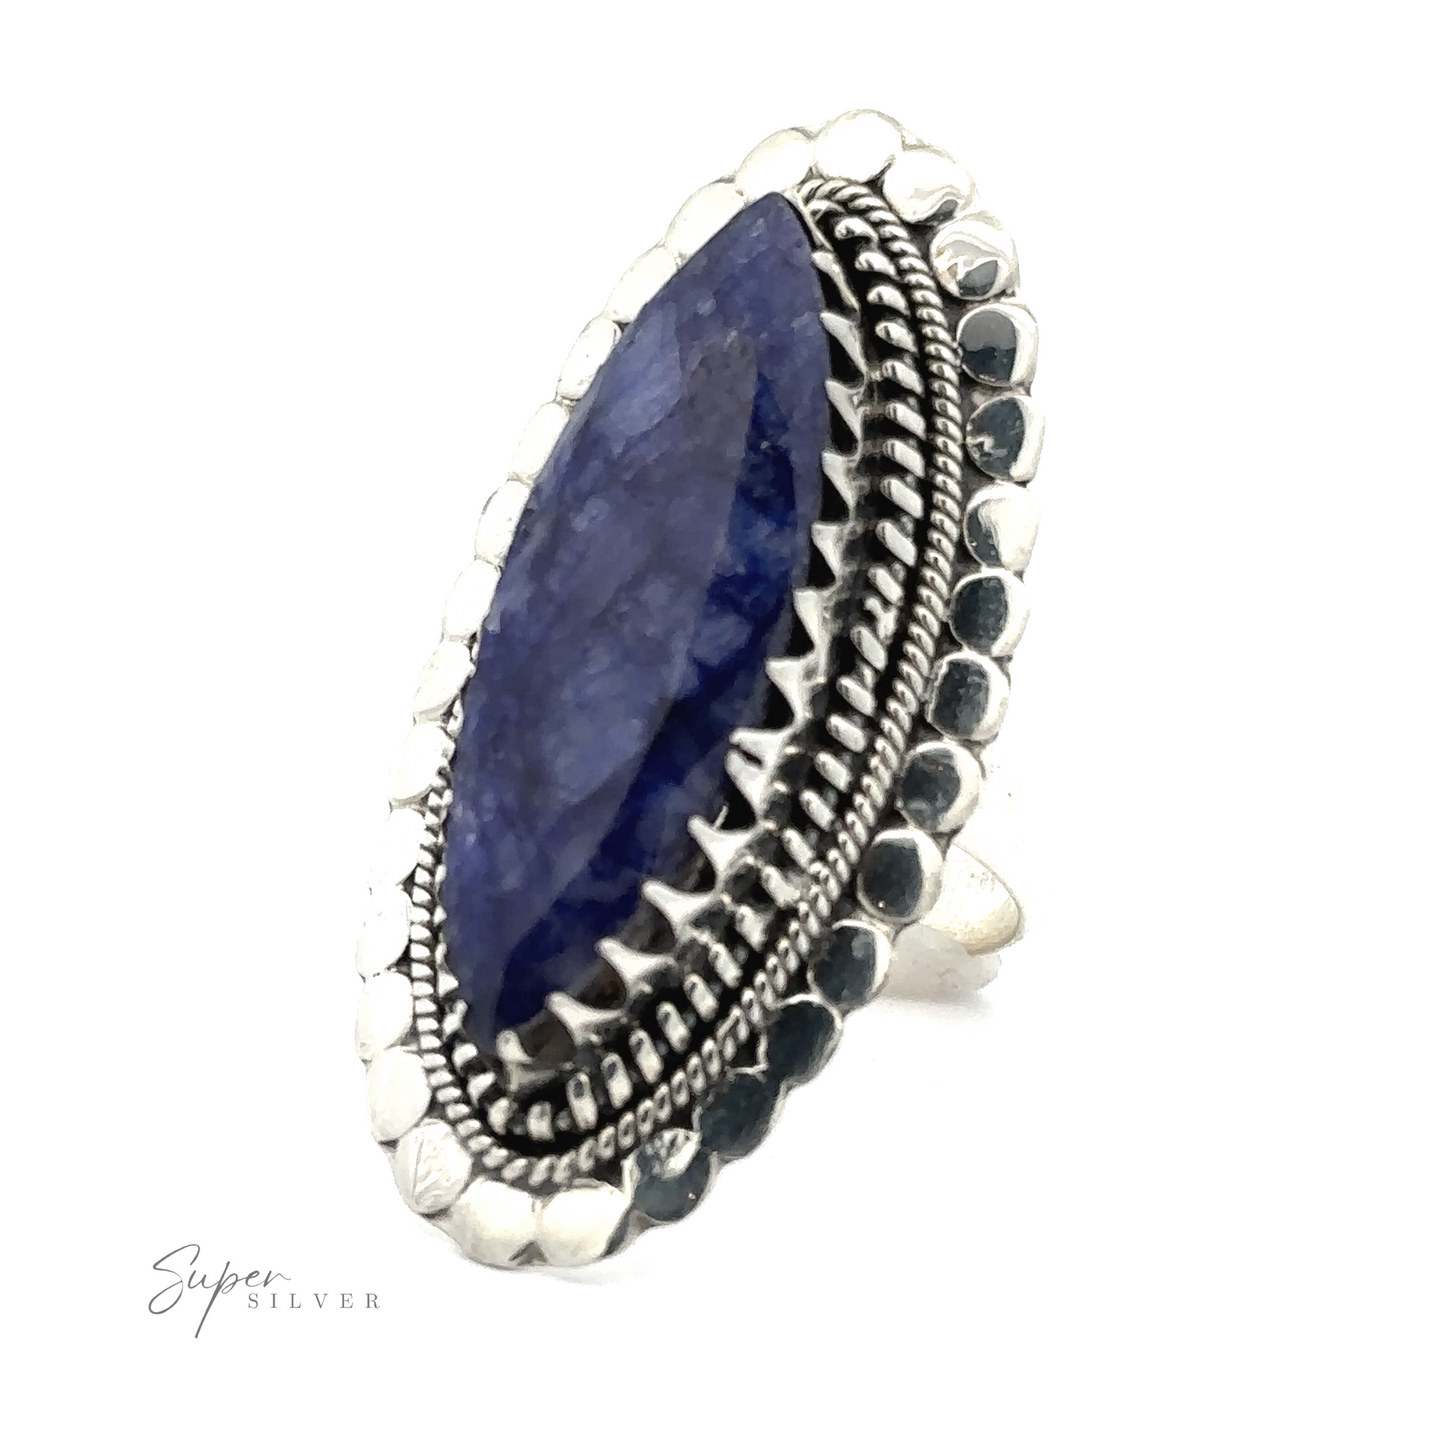 
                  
                    A Statement Marquise Shaped Gemstone Ring with an oval blue stone setting, featuring intricate bead and rope detailing around the bezel. This bohemian jewelry piece exudes charm, with the brand name "Super Silver" visible in the bottom left corner.
                  
                